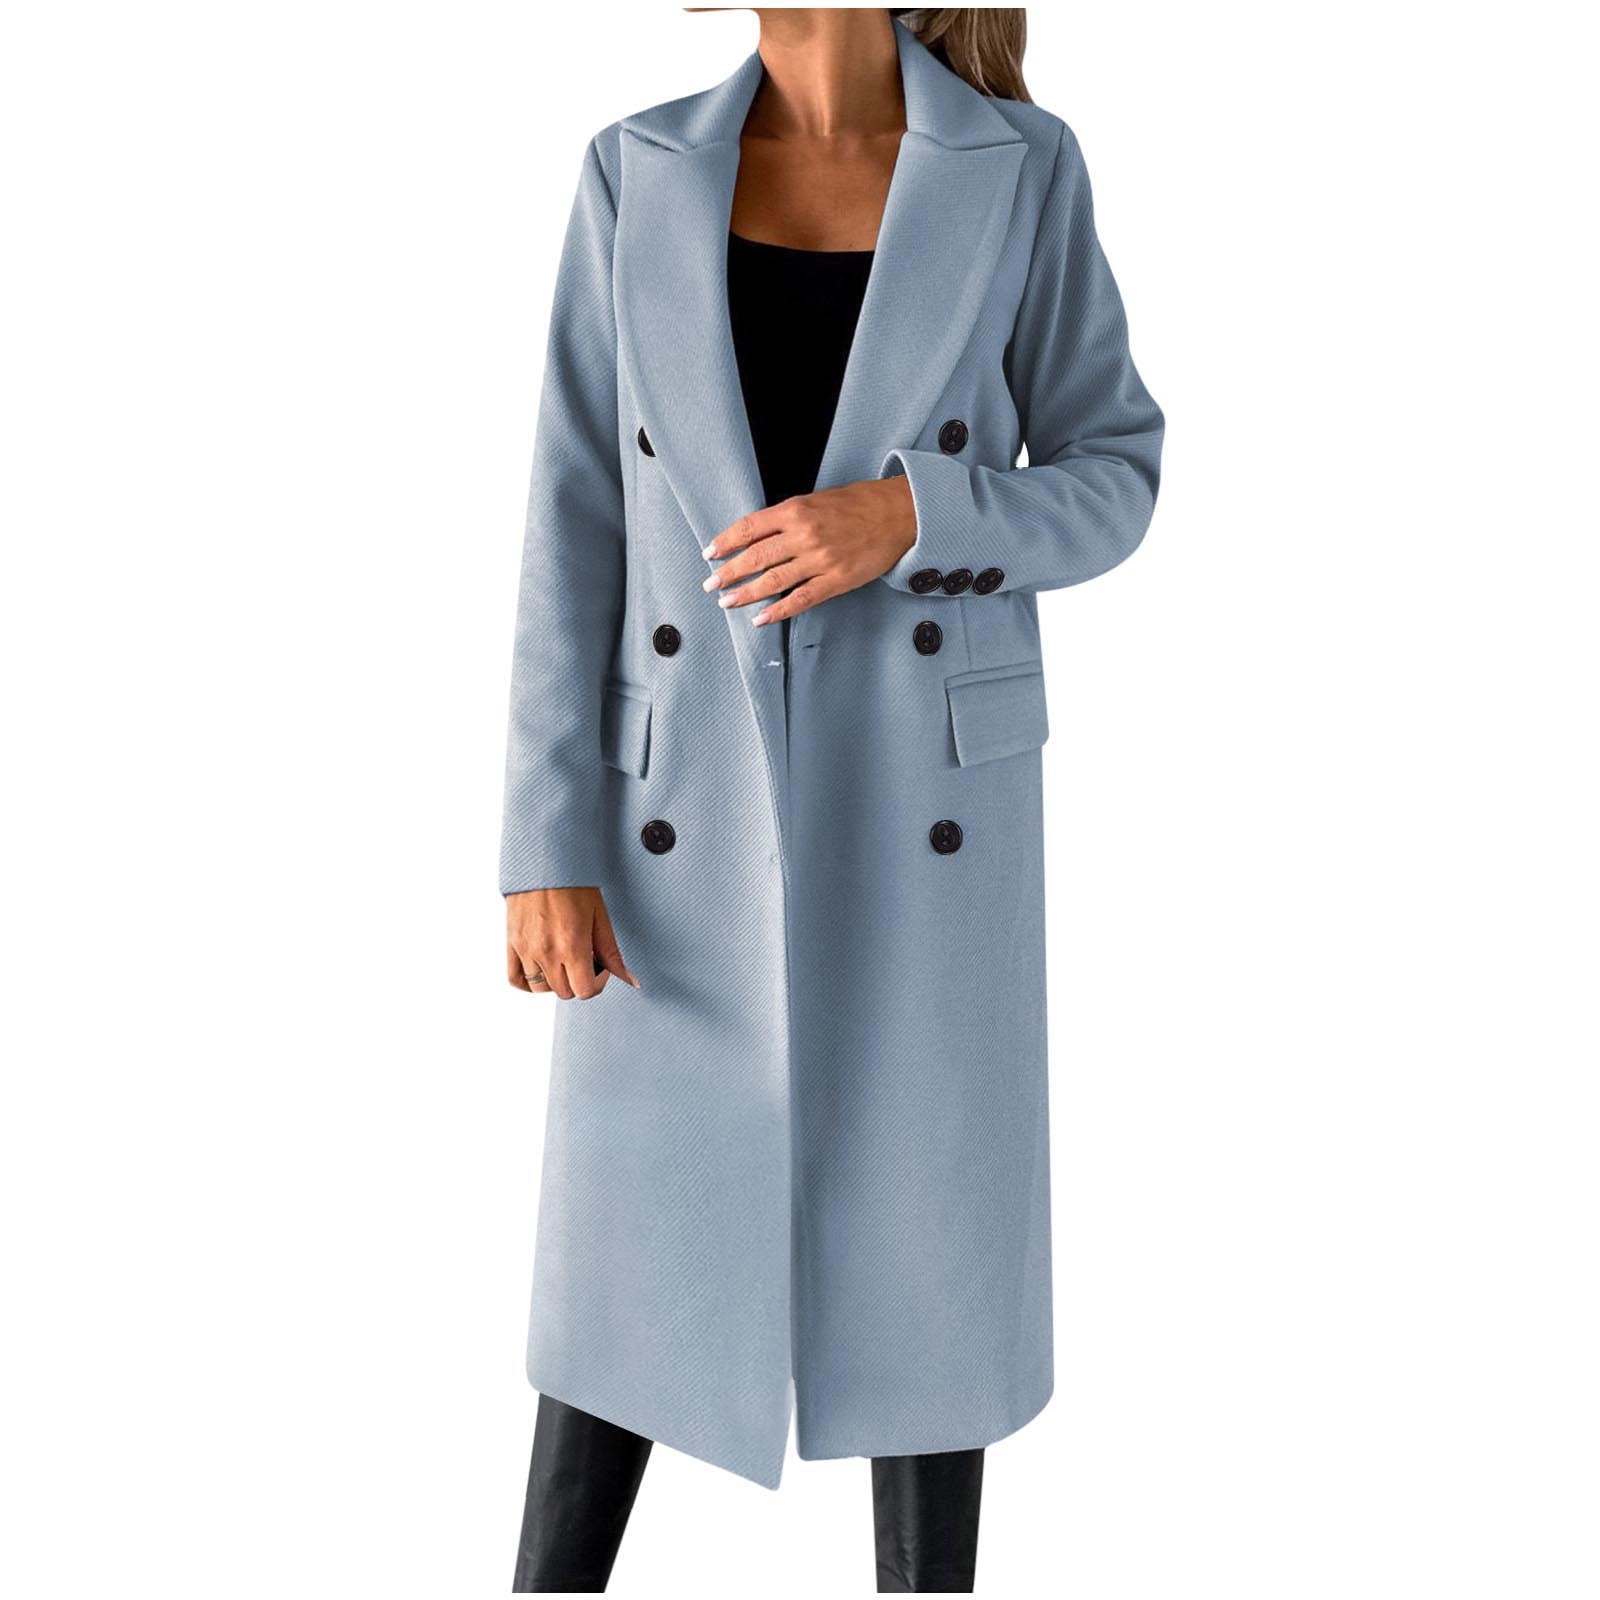 Hfyihgf Women's Double Breasted Trench Coat Classic Notch Collar Long  Sleeve Peacoats Winter Warm Slim Fit Long Woolen Jackets Coat with Pockets 